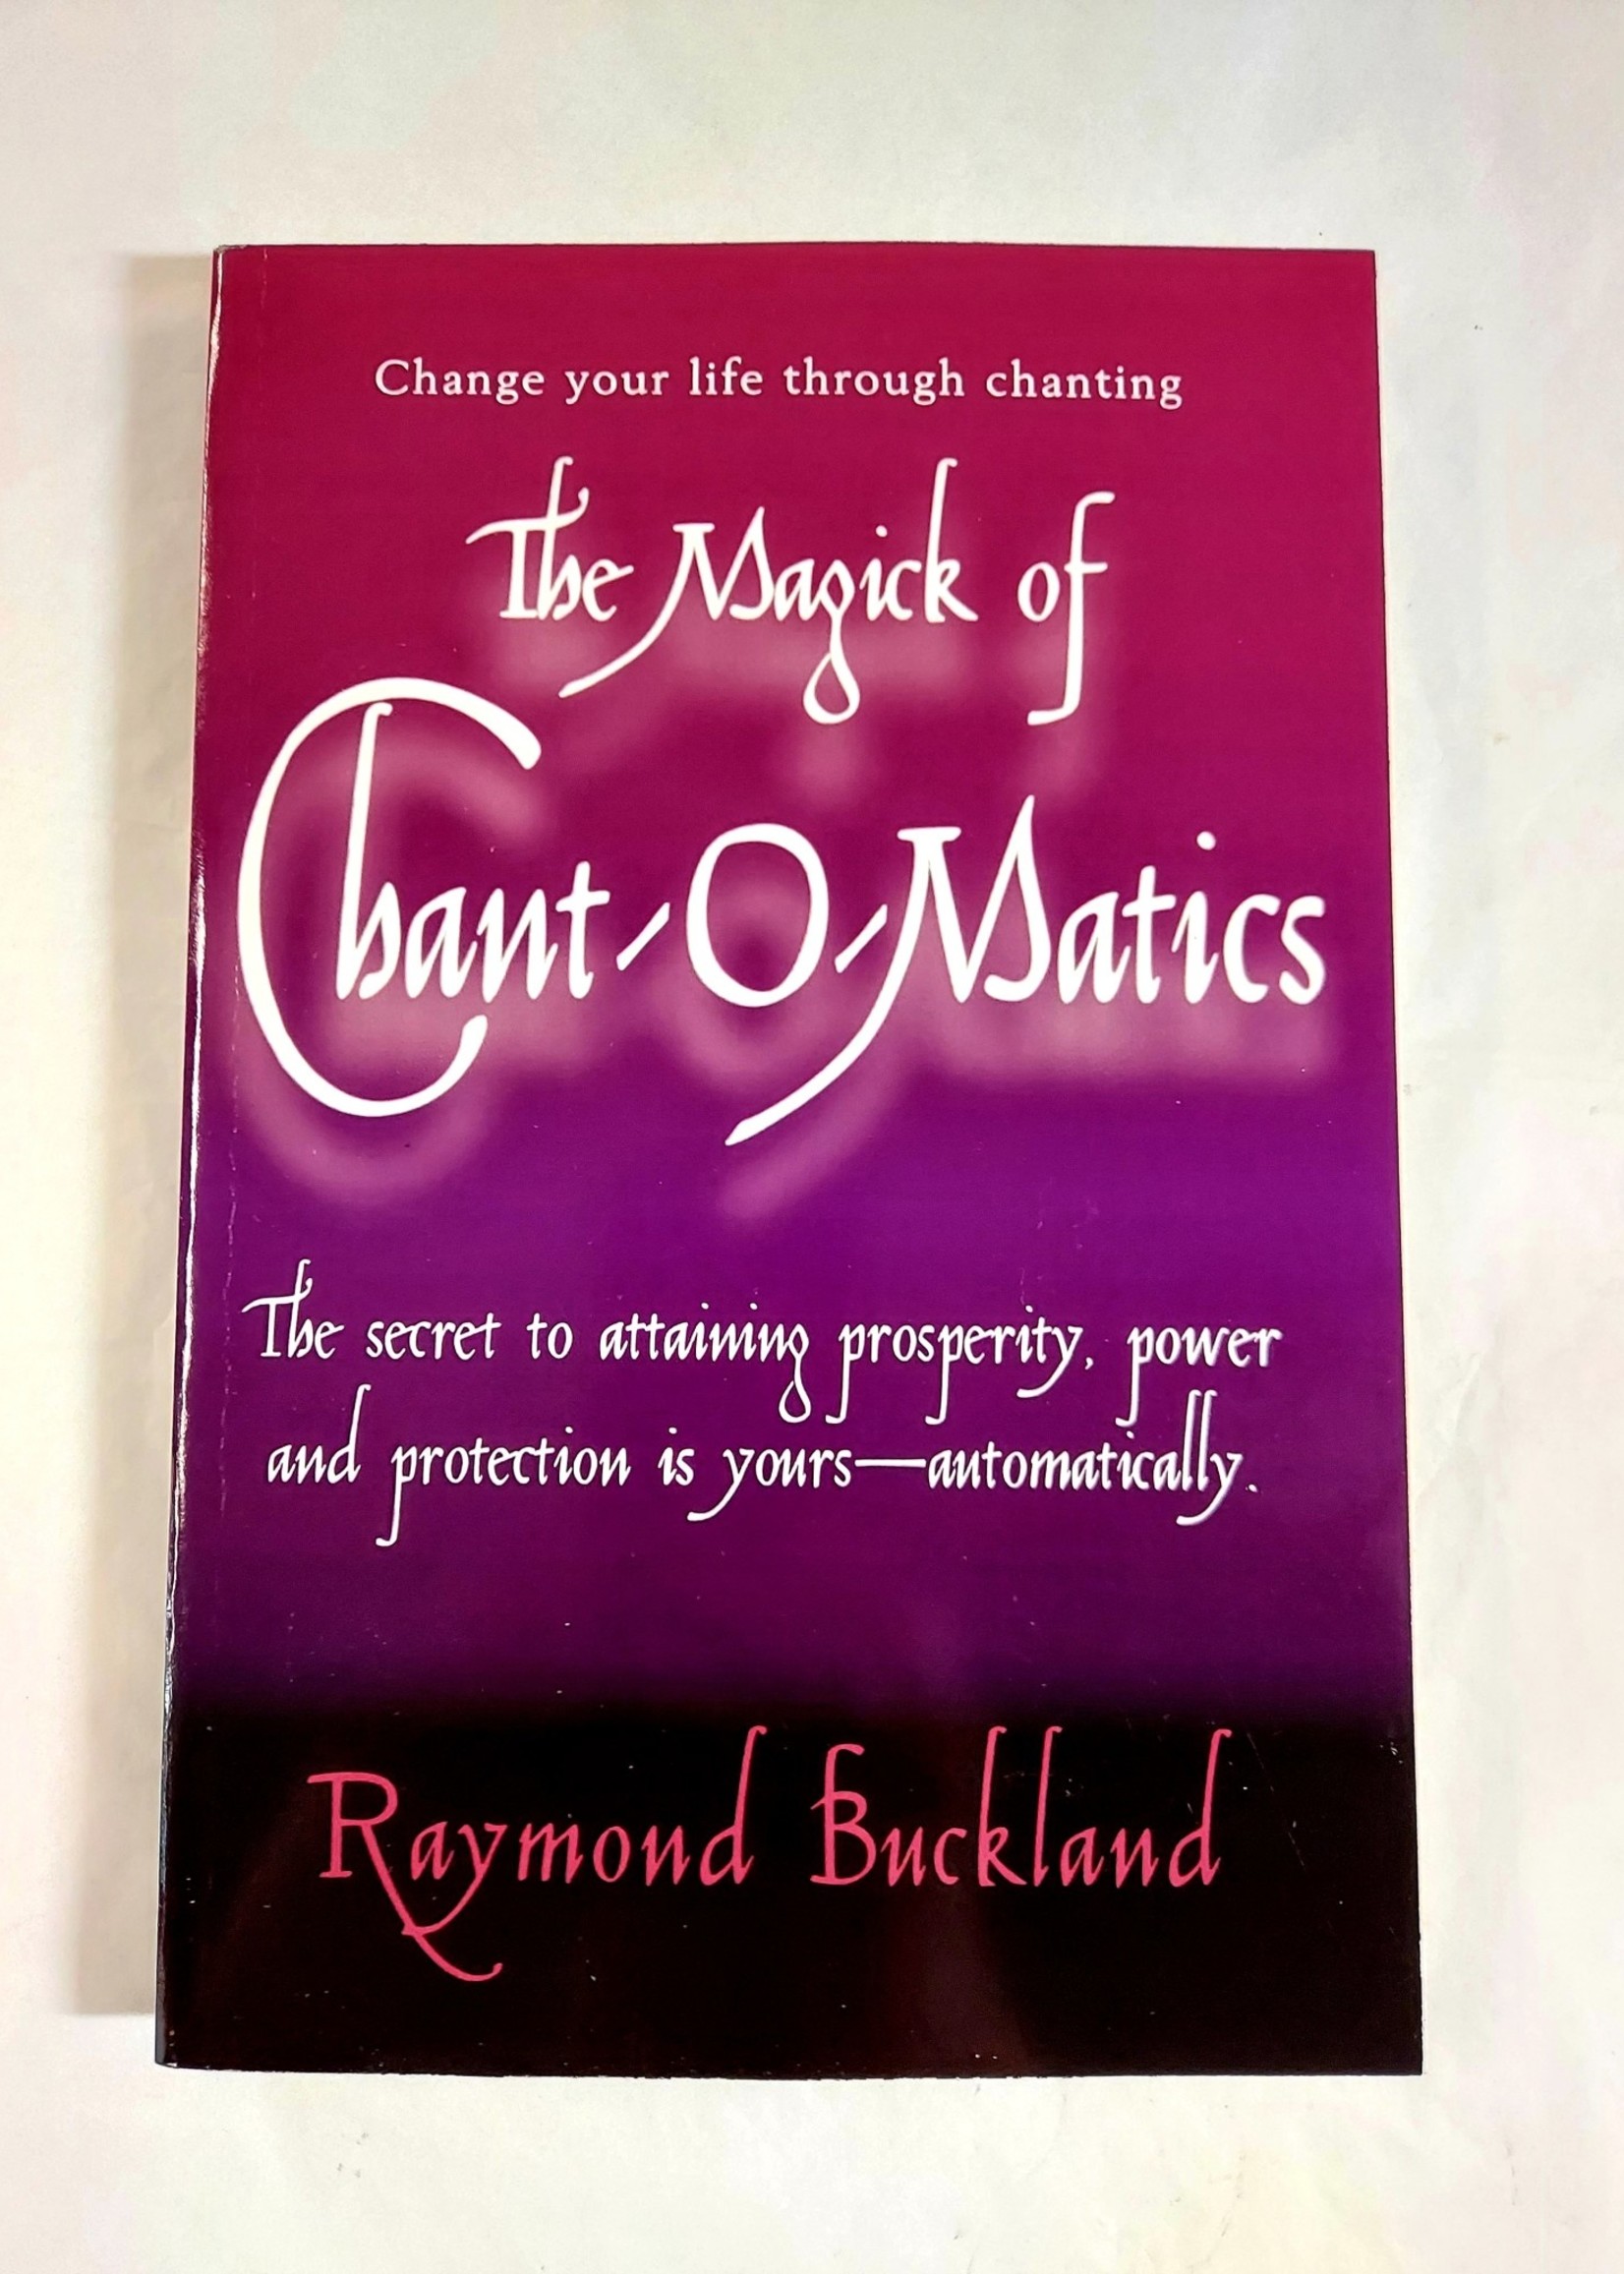 The Magick of Chant-O-Matics CHANGE YOUR LIFE THROUGH CHANTING - By RAYMOND BUCKLAND